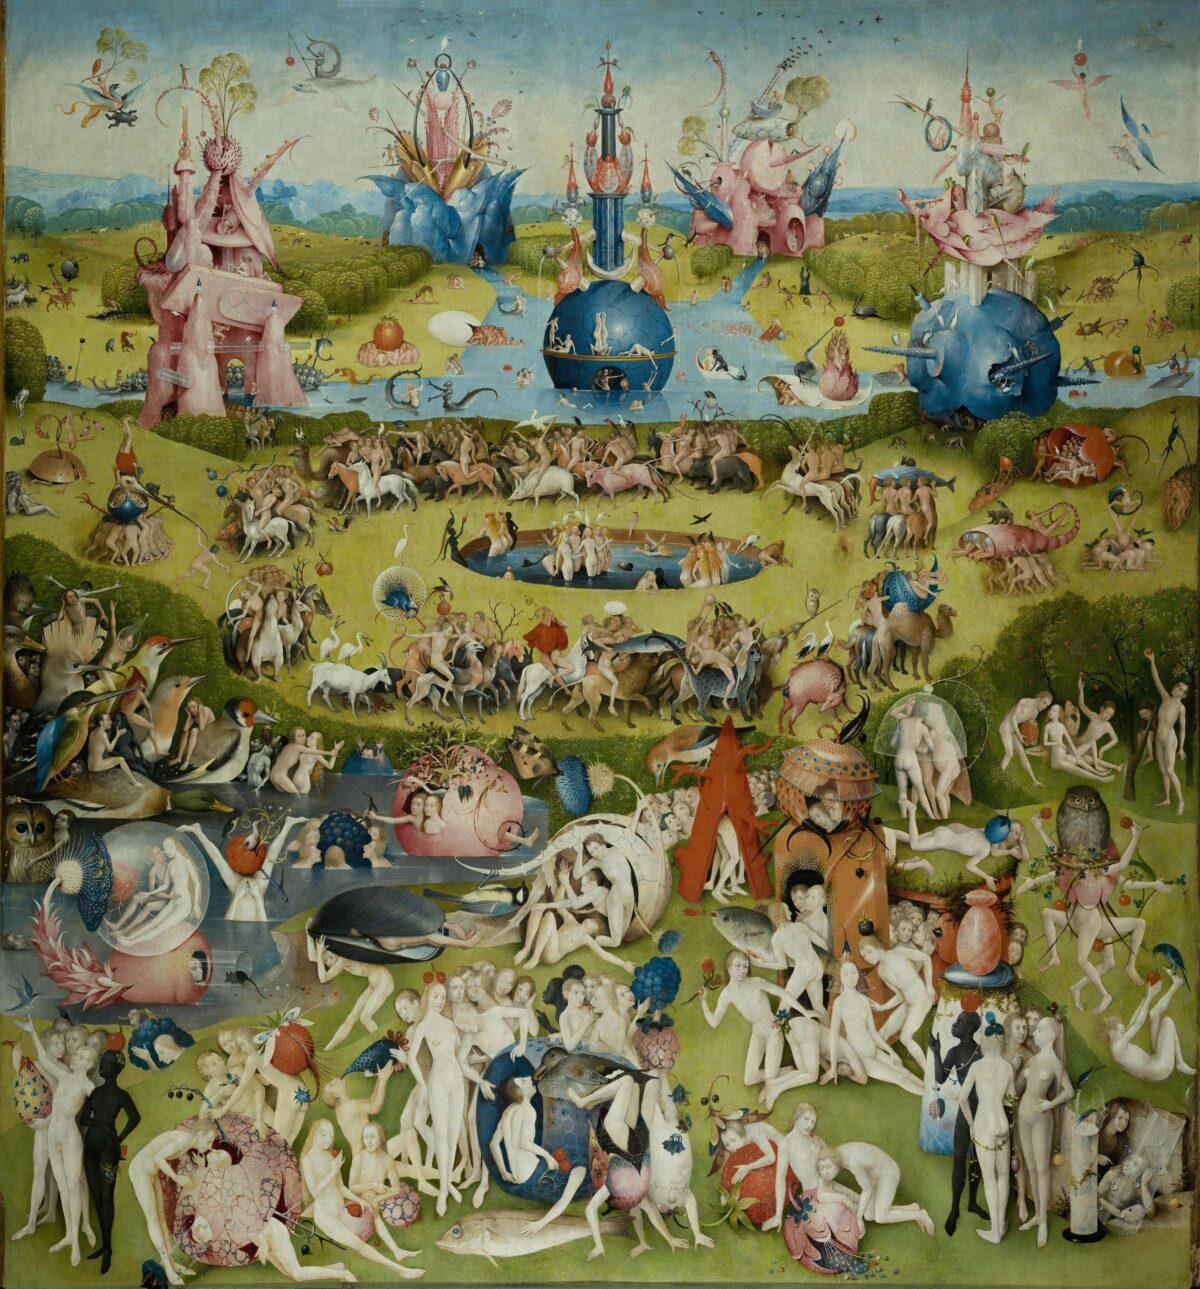 Hieronymus Bosch’s central panel of the triptych “The Garden of Earthly Delights.” Prado Museum, Madrid. (Public Domain)